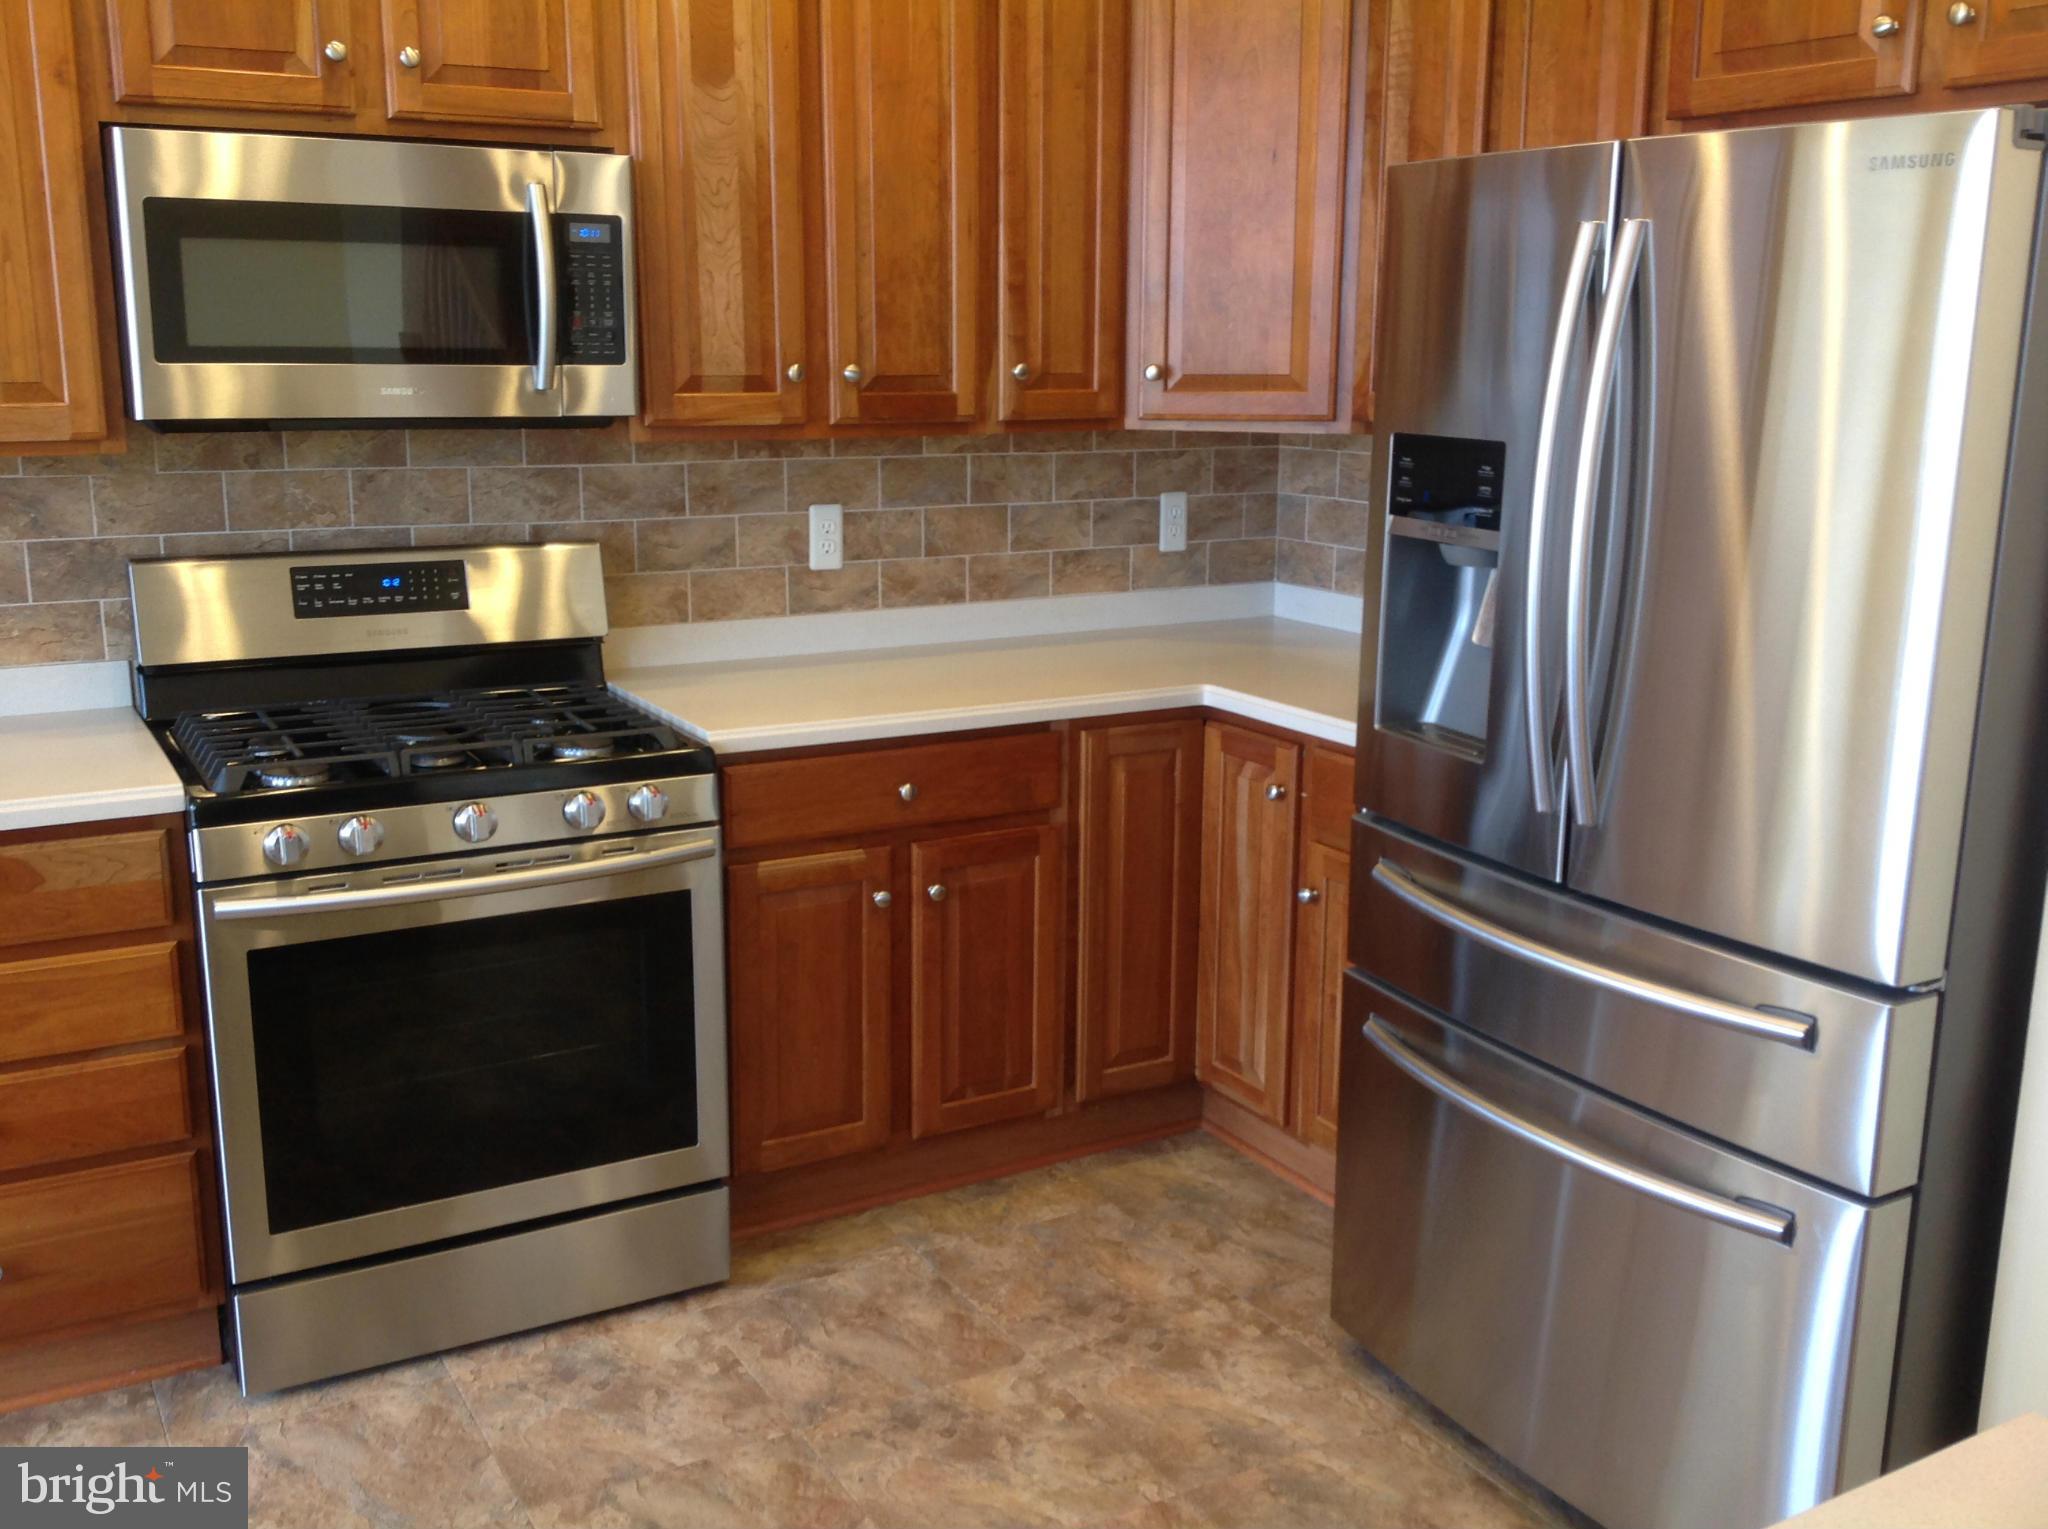 a kitchen with stainless steel appliances and cabinets